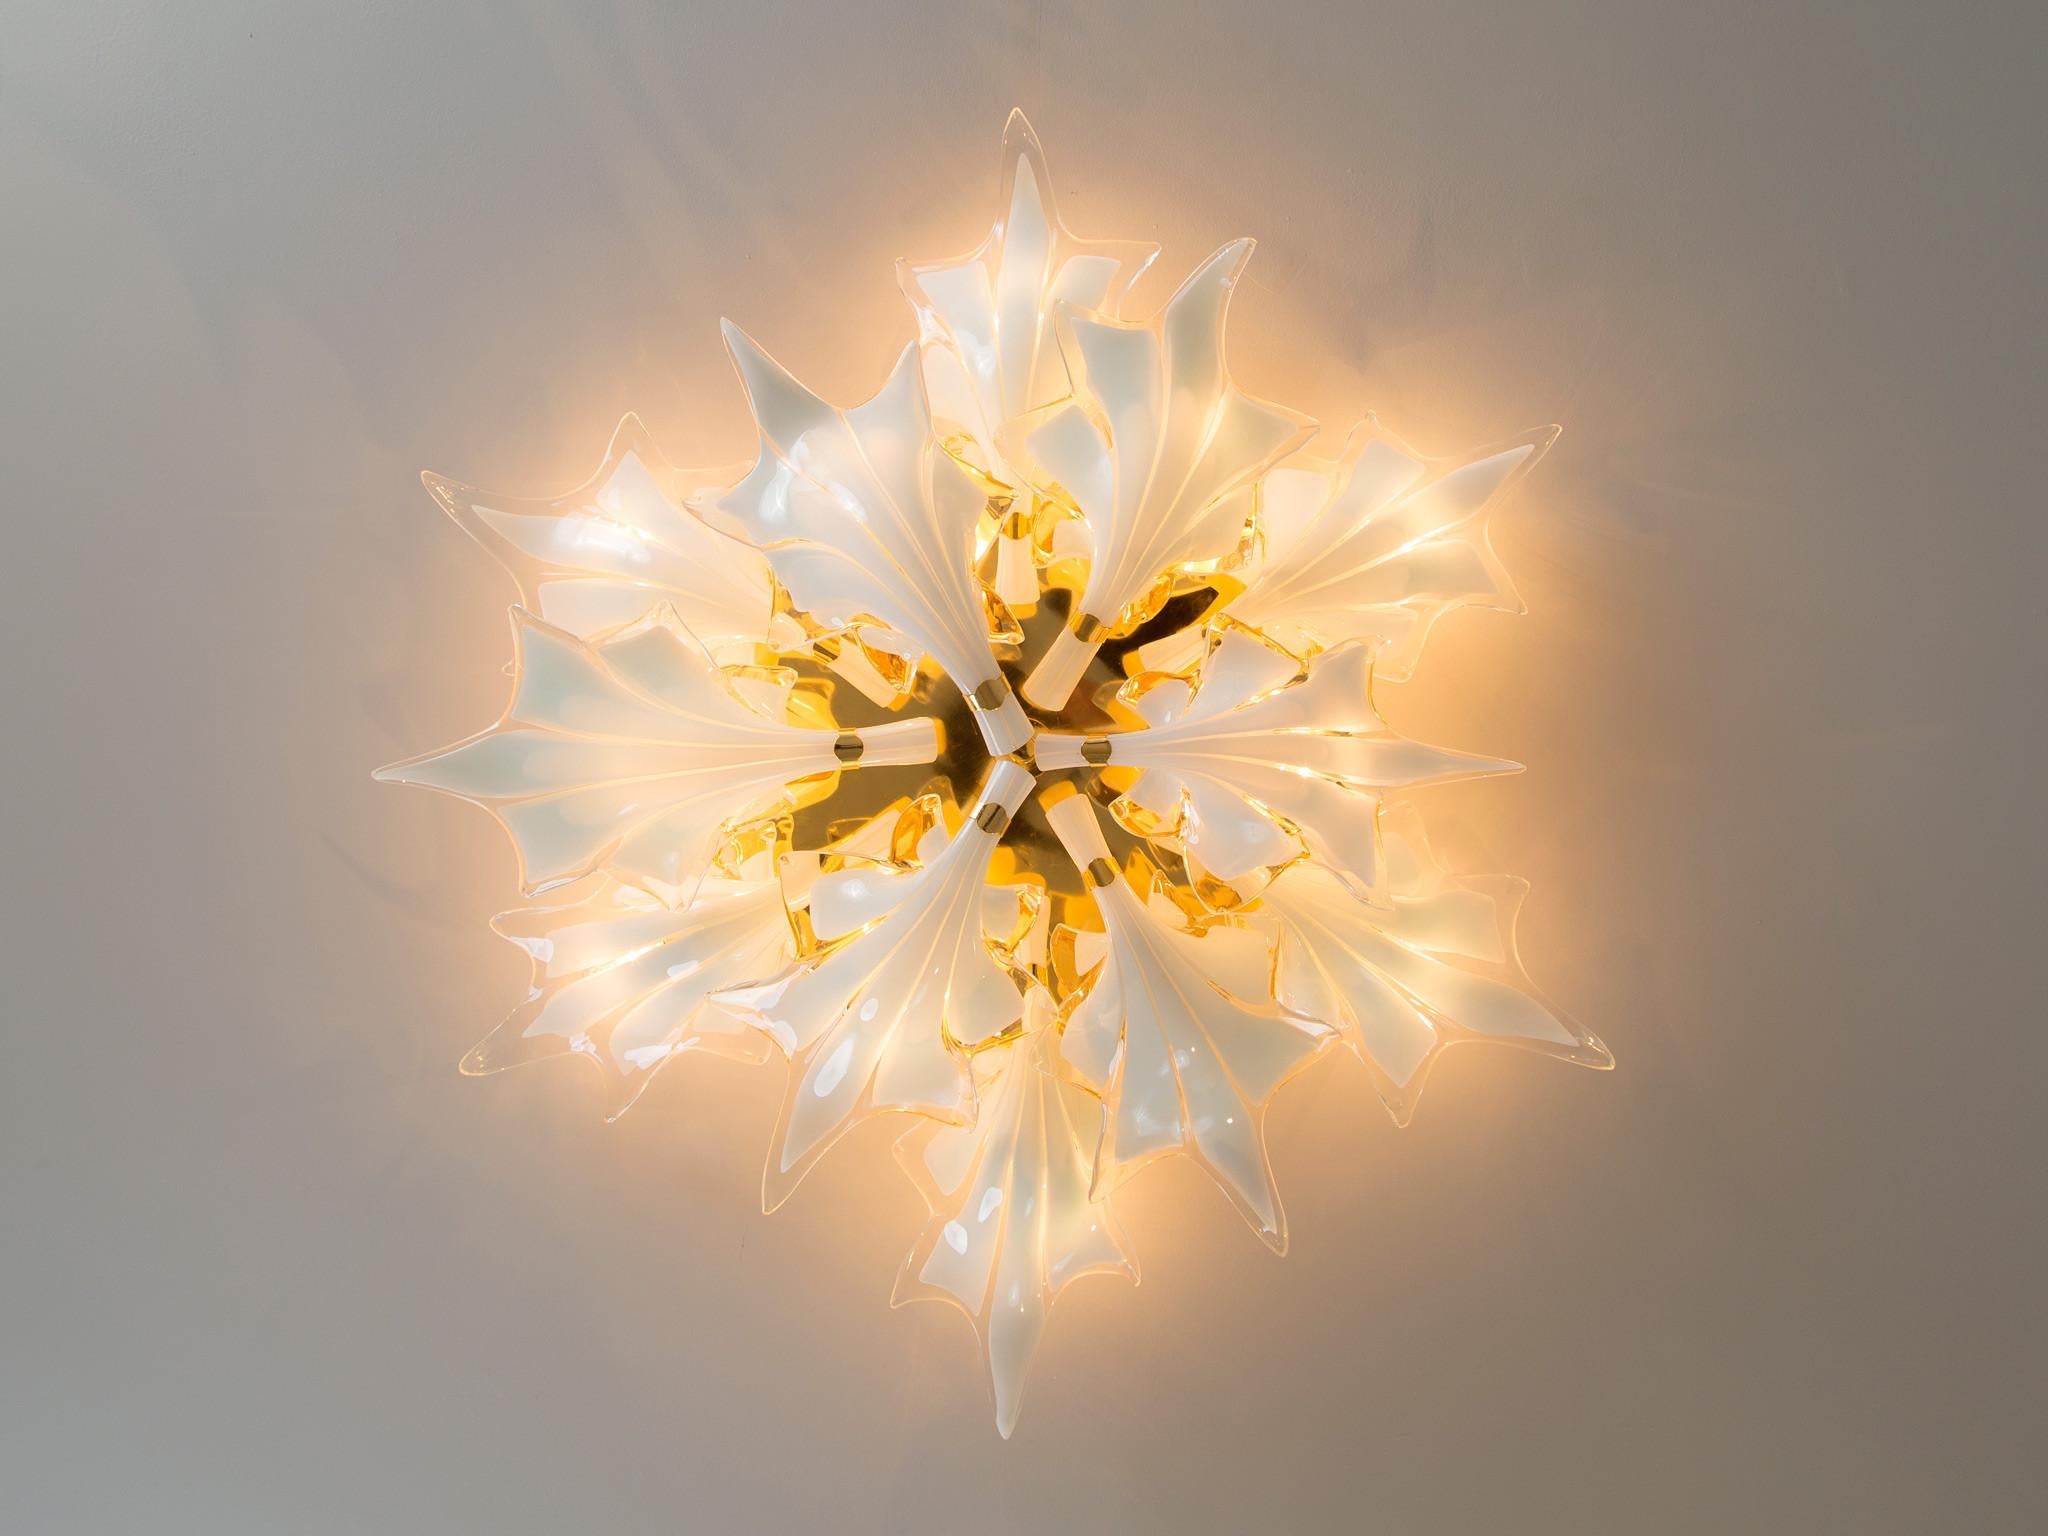 Ceiling lamp, glass, brass, mirror, Italy, 1970s

Elegant and organic shaped ceiling lamp made in Italy. The form of the lamp reminds of lilies, which give the lamp a floral feeling. The delicate shape of the 'leaves' is emphasized by the white